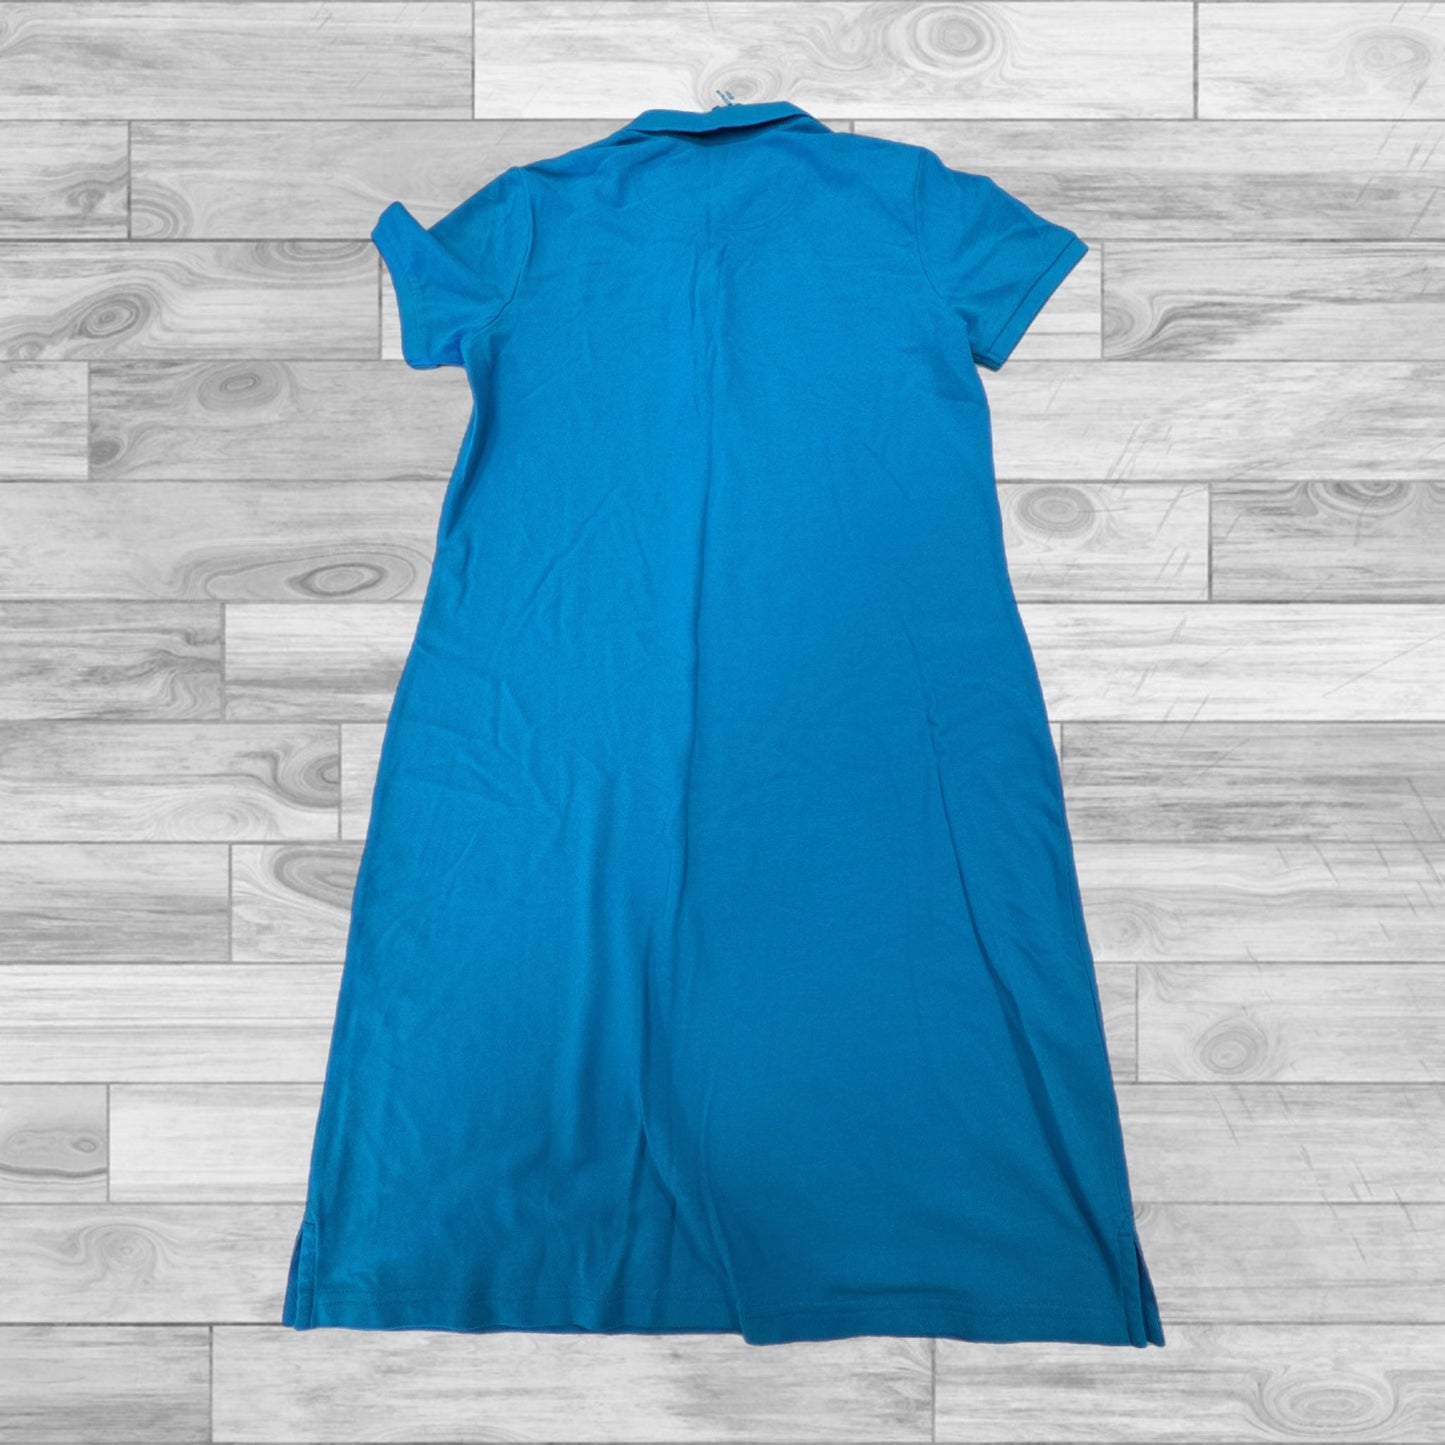 Blue Dress Casual Short Tommy Bahama, Size S